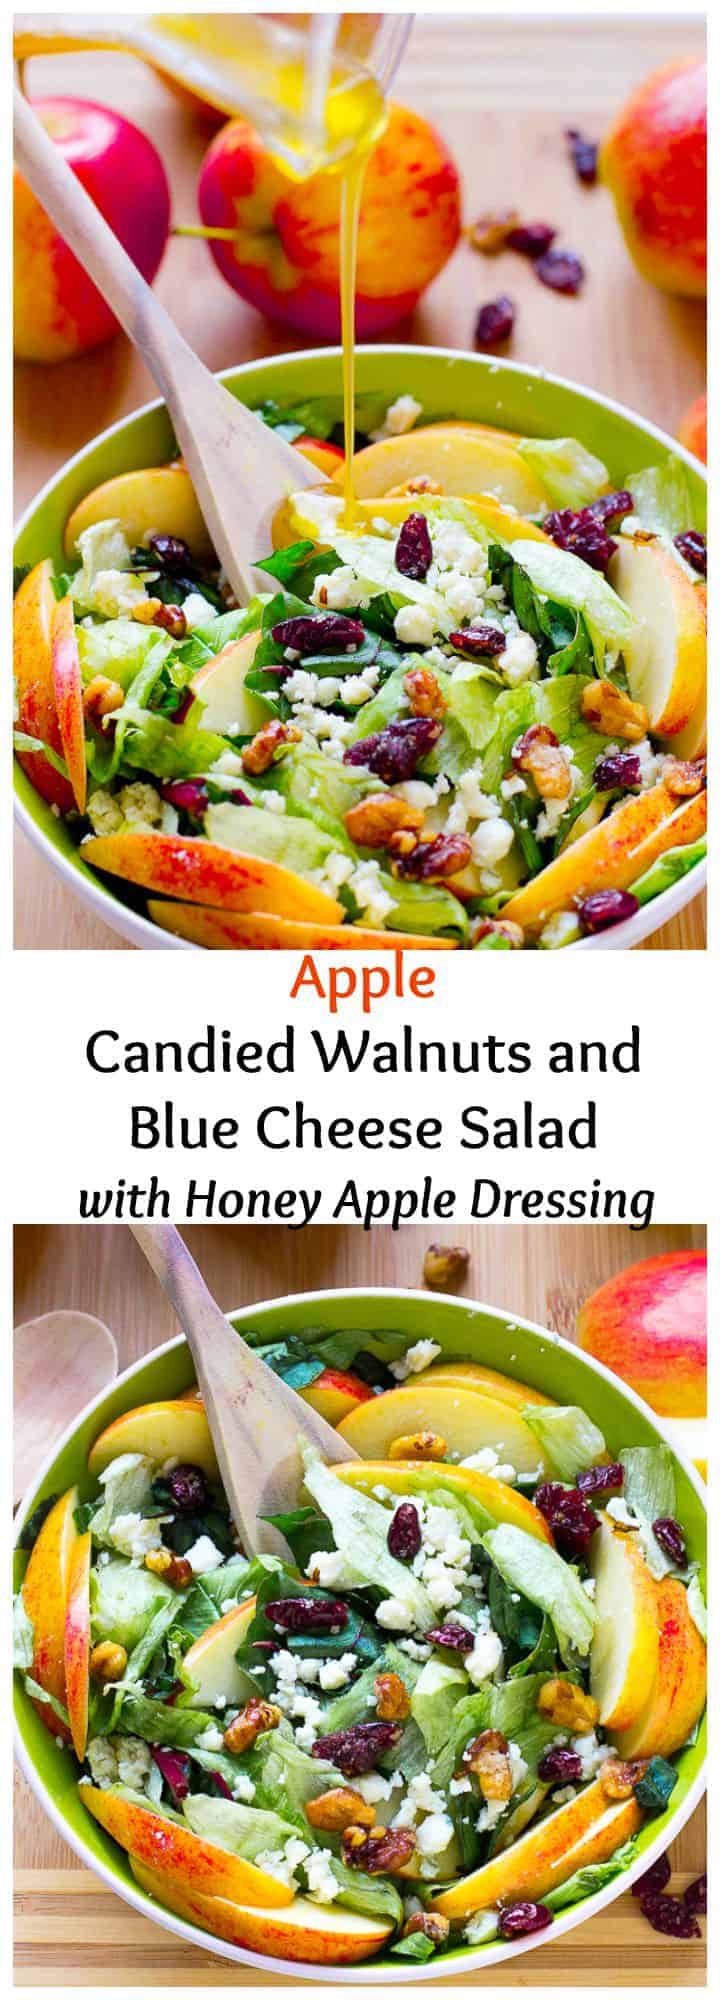 This Apple Candied Walnuts and Blue Cheese Salad with Honey Apple Dressing is filled with fall flavours, sweet, and crunchy!